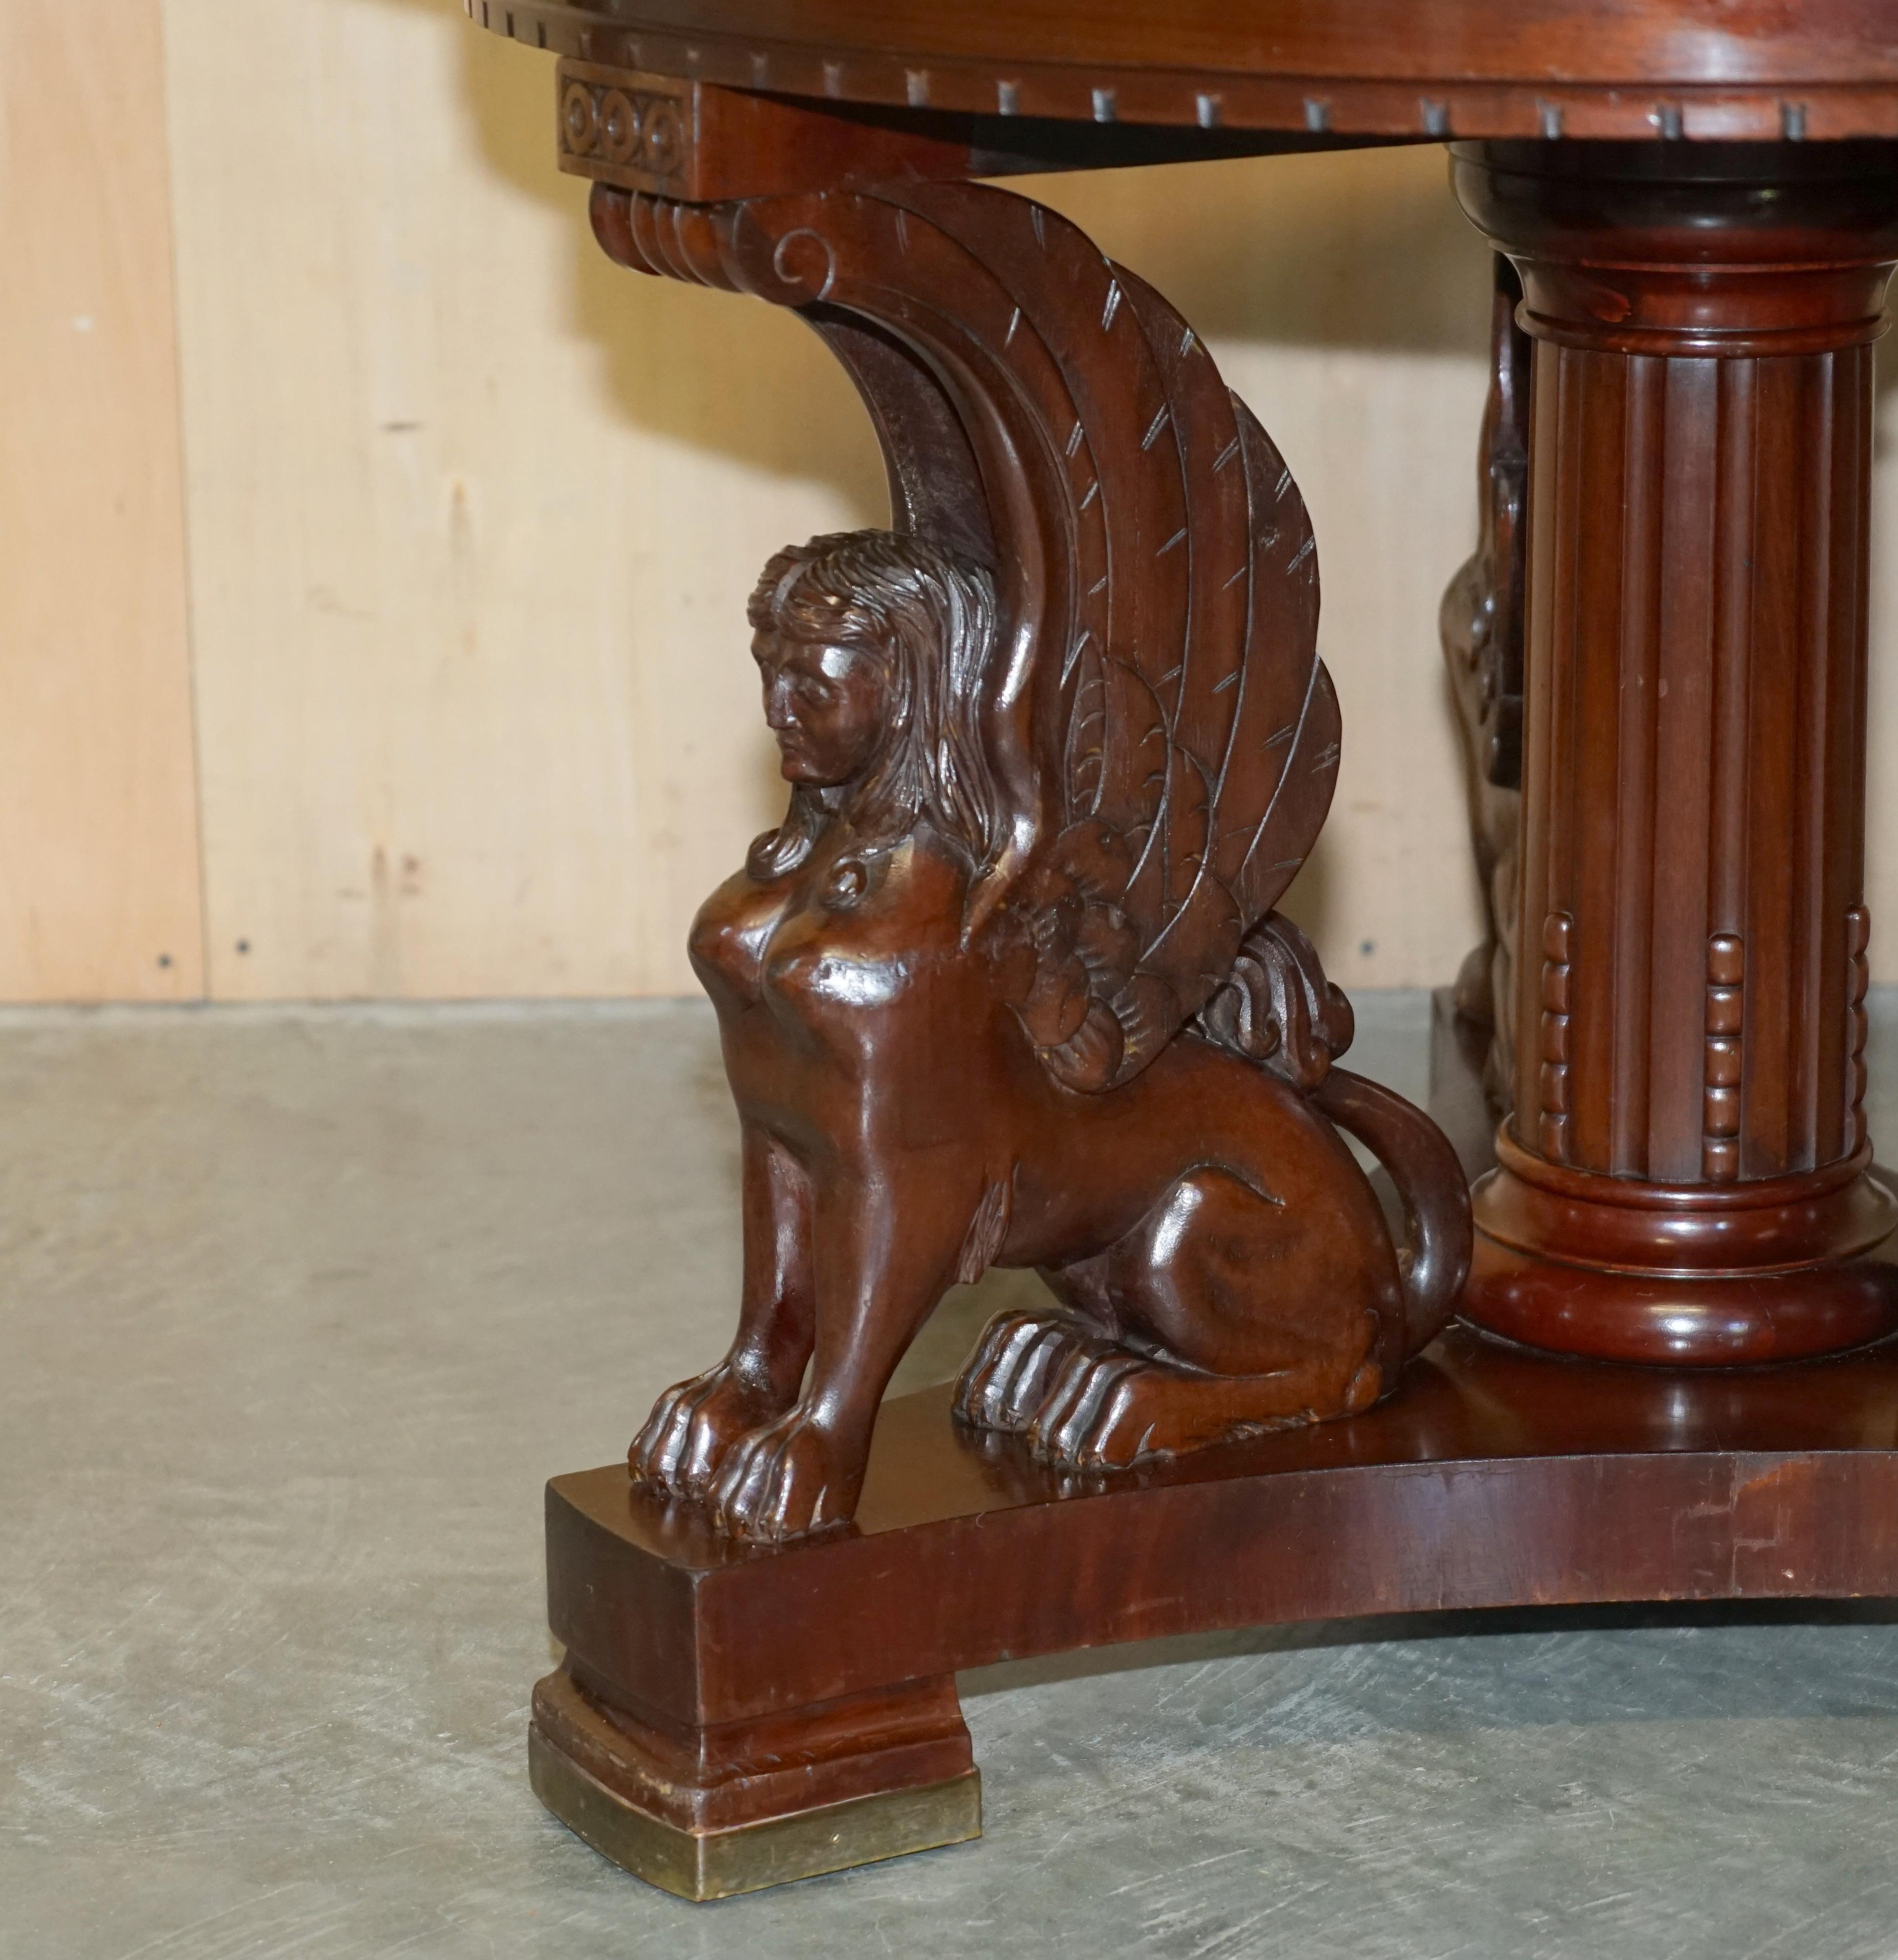 FINE ANTIQUE FRENCH NEOCLASSICAL HARDWOOD CENTRE TABLE WiTH SPHINX PILLARED BASE (19. Jahrhundert) im Angebot